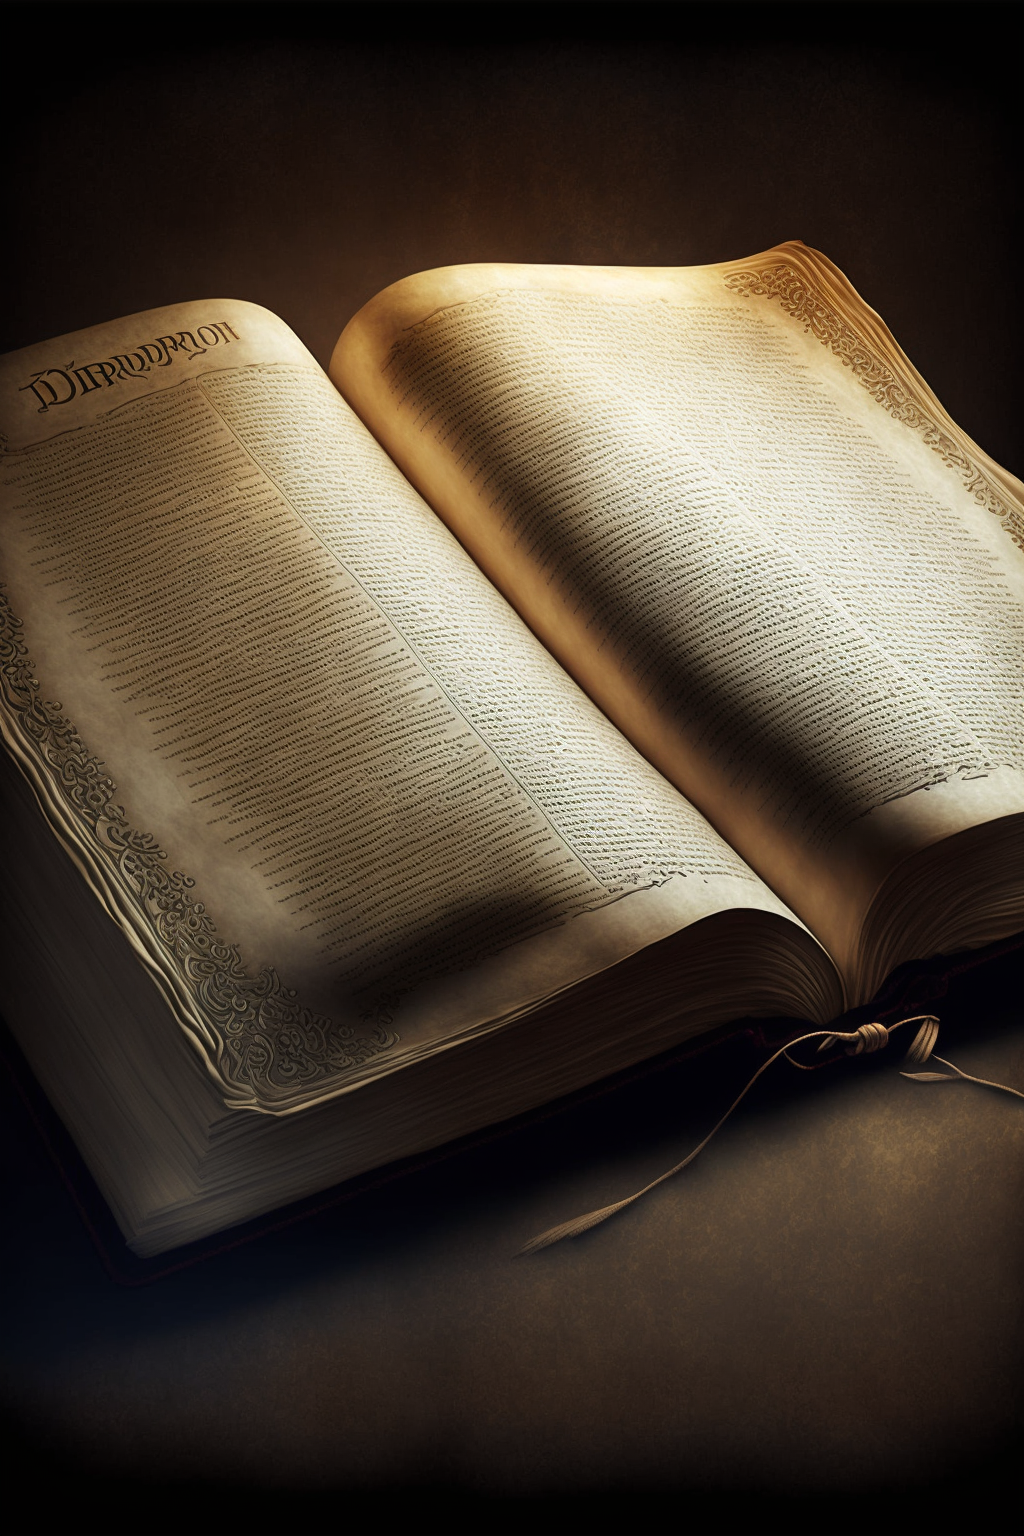 open bible backgrounds for powerpoint